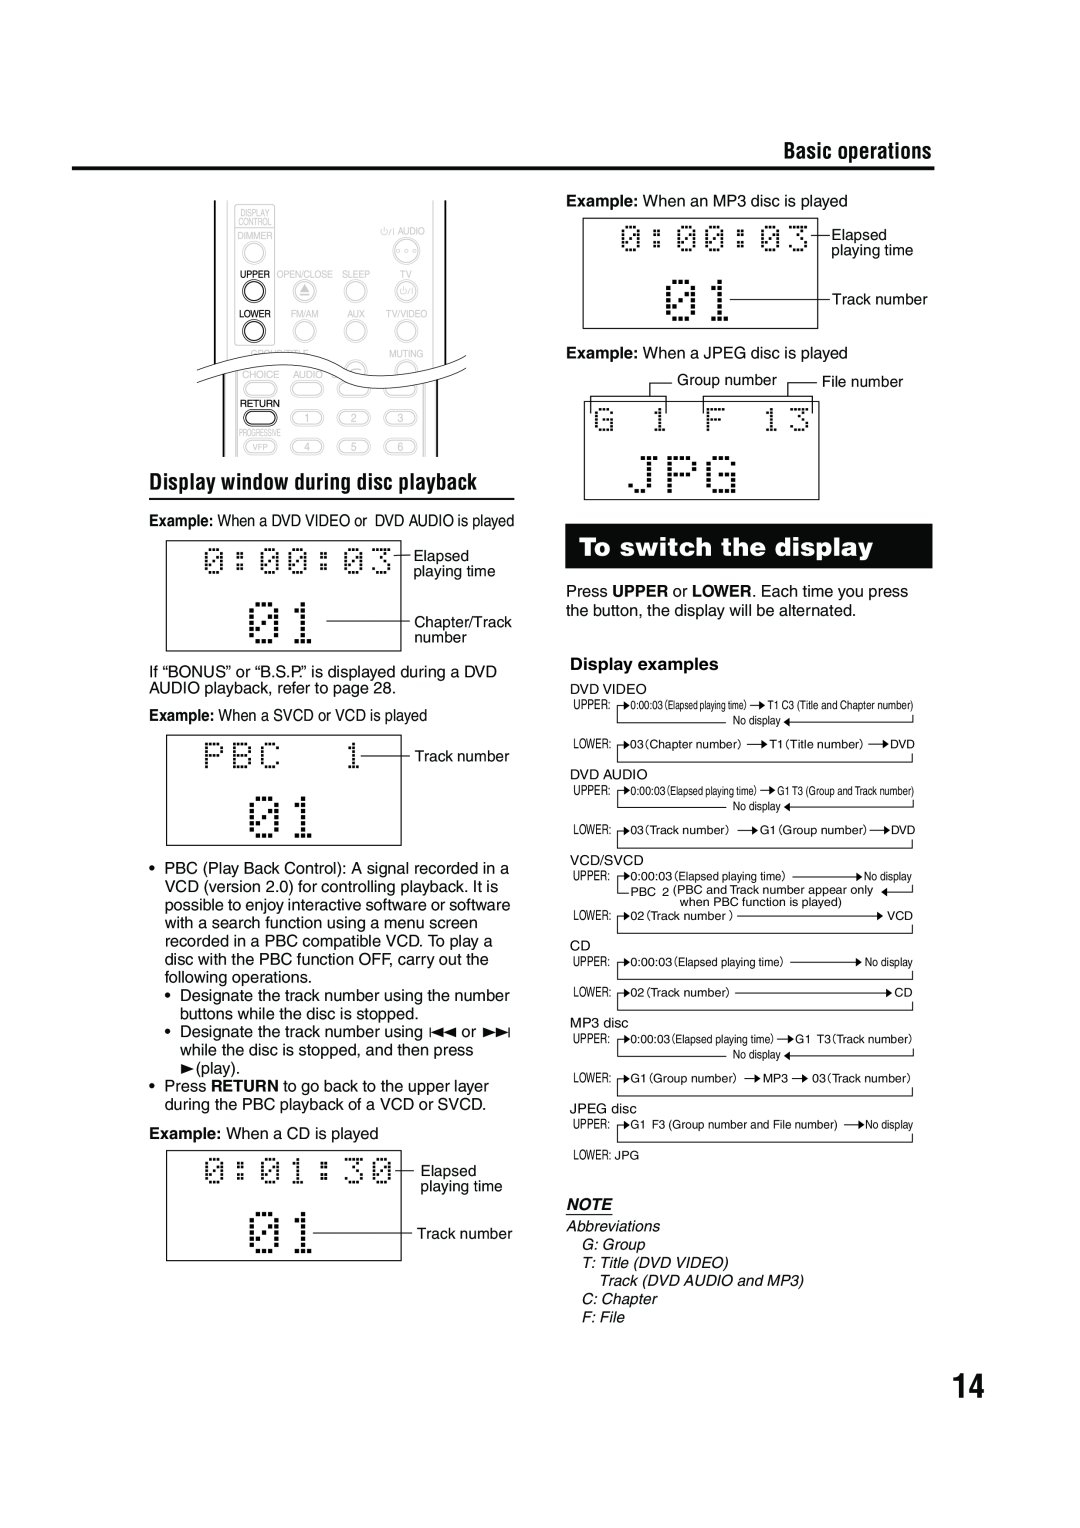 JVC EX-A1 manual To switch the display, Basic operations, Display window during disc playback, Display examples 